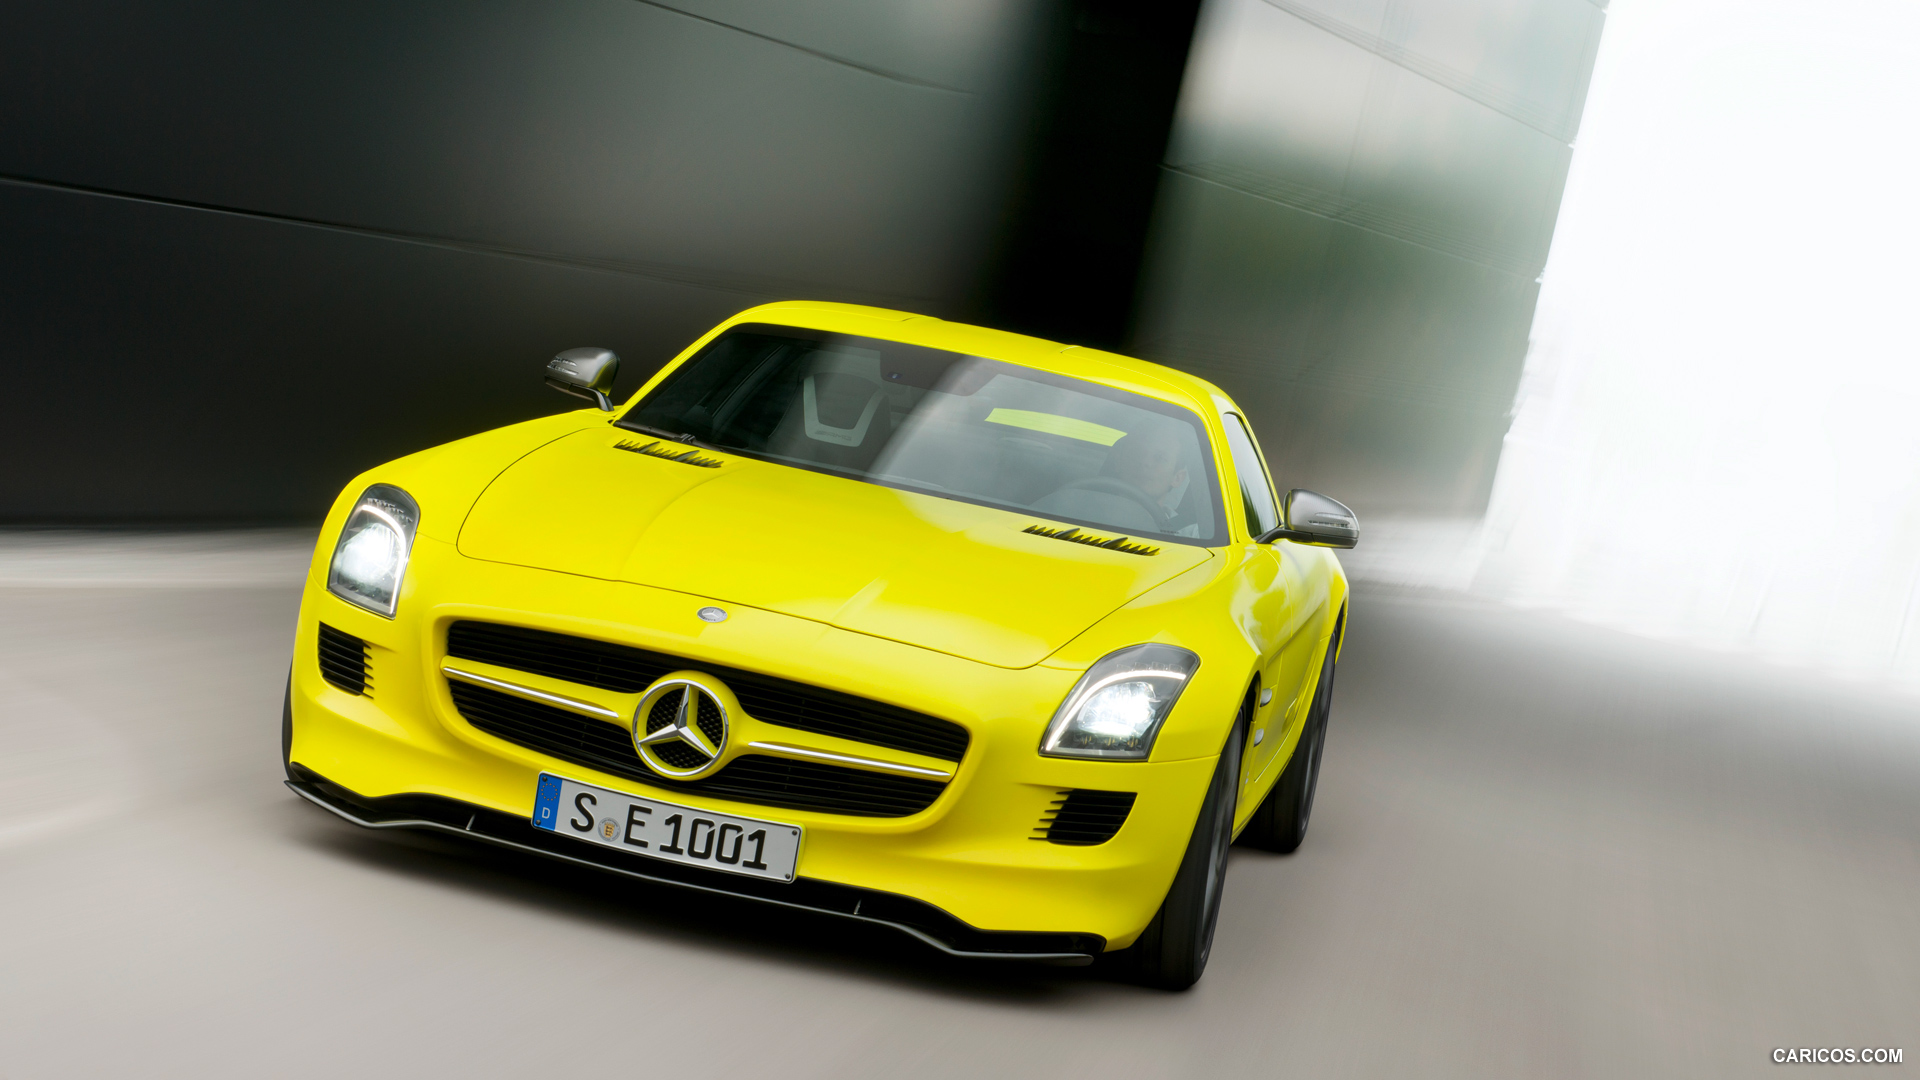 Mercedes-Benz SLS AMG E-CELL Concept  - Front, #50 of 60